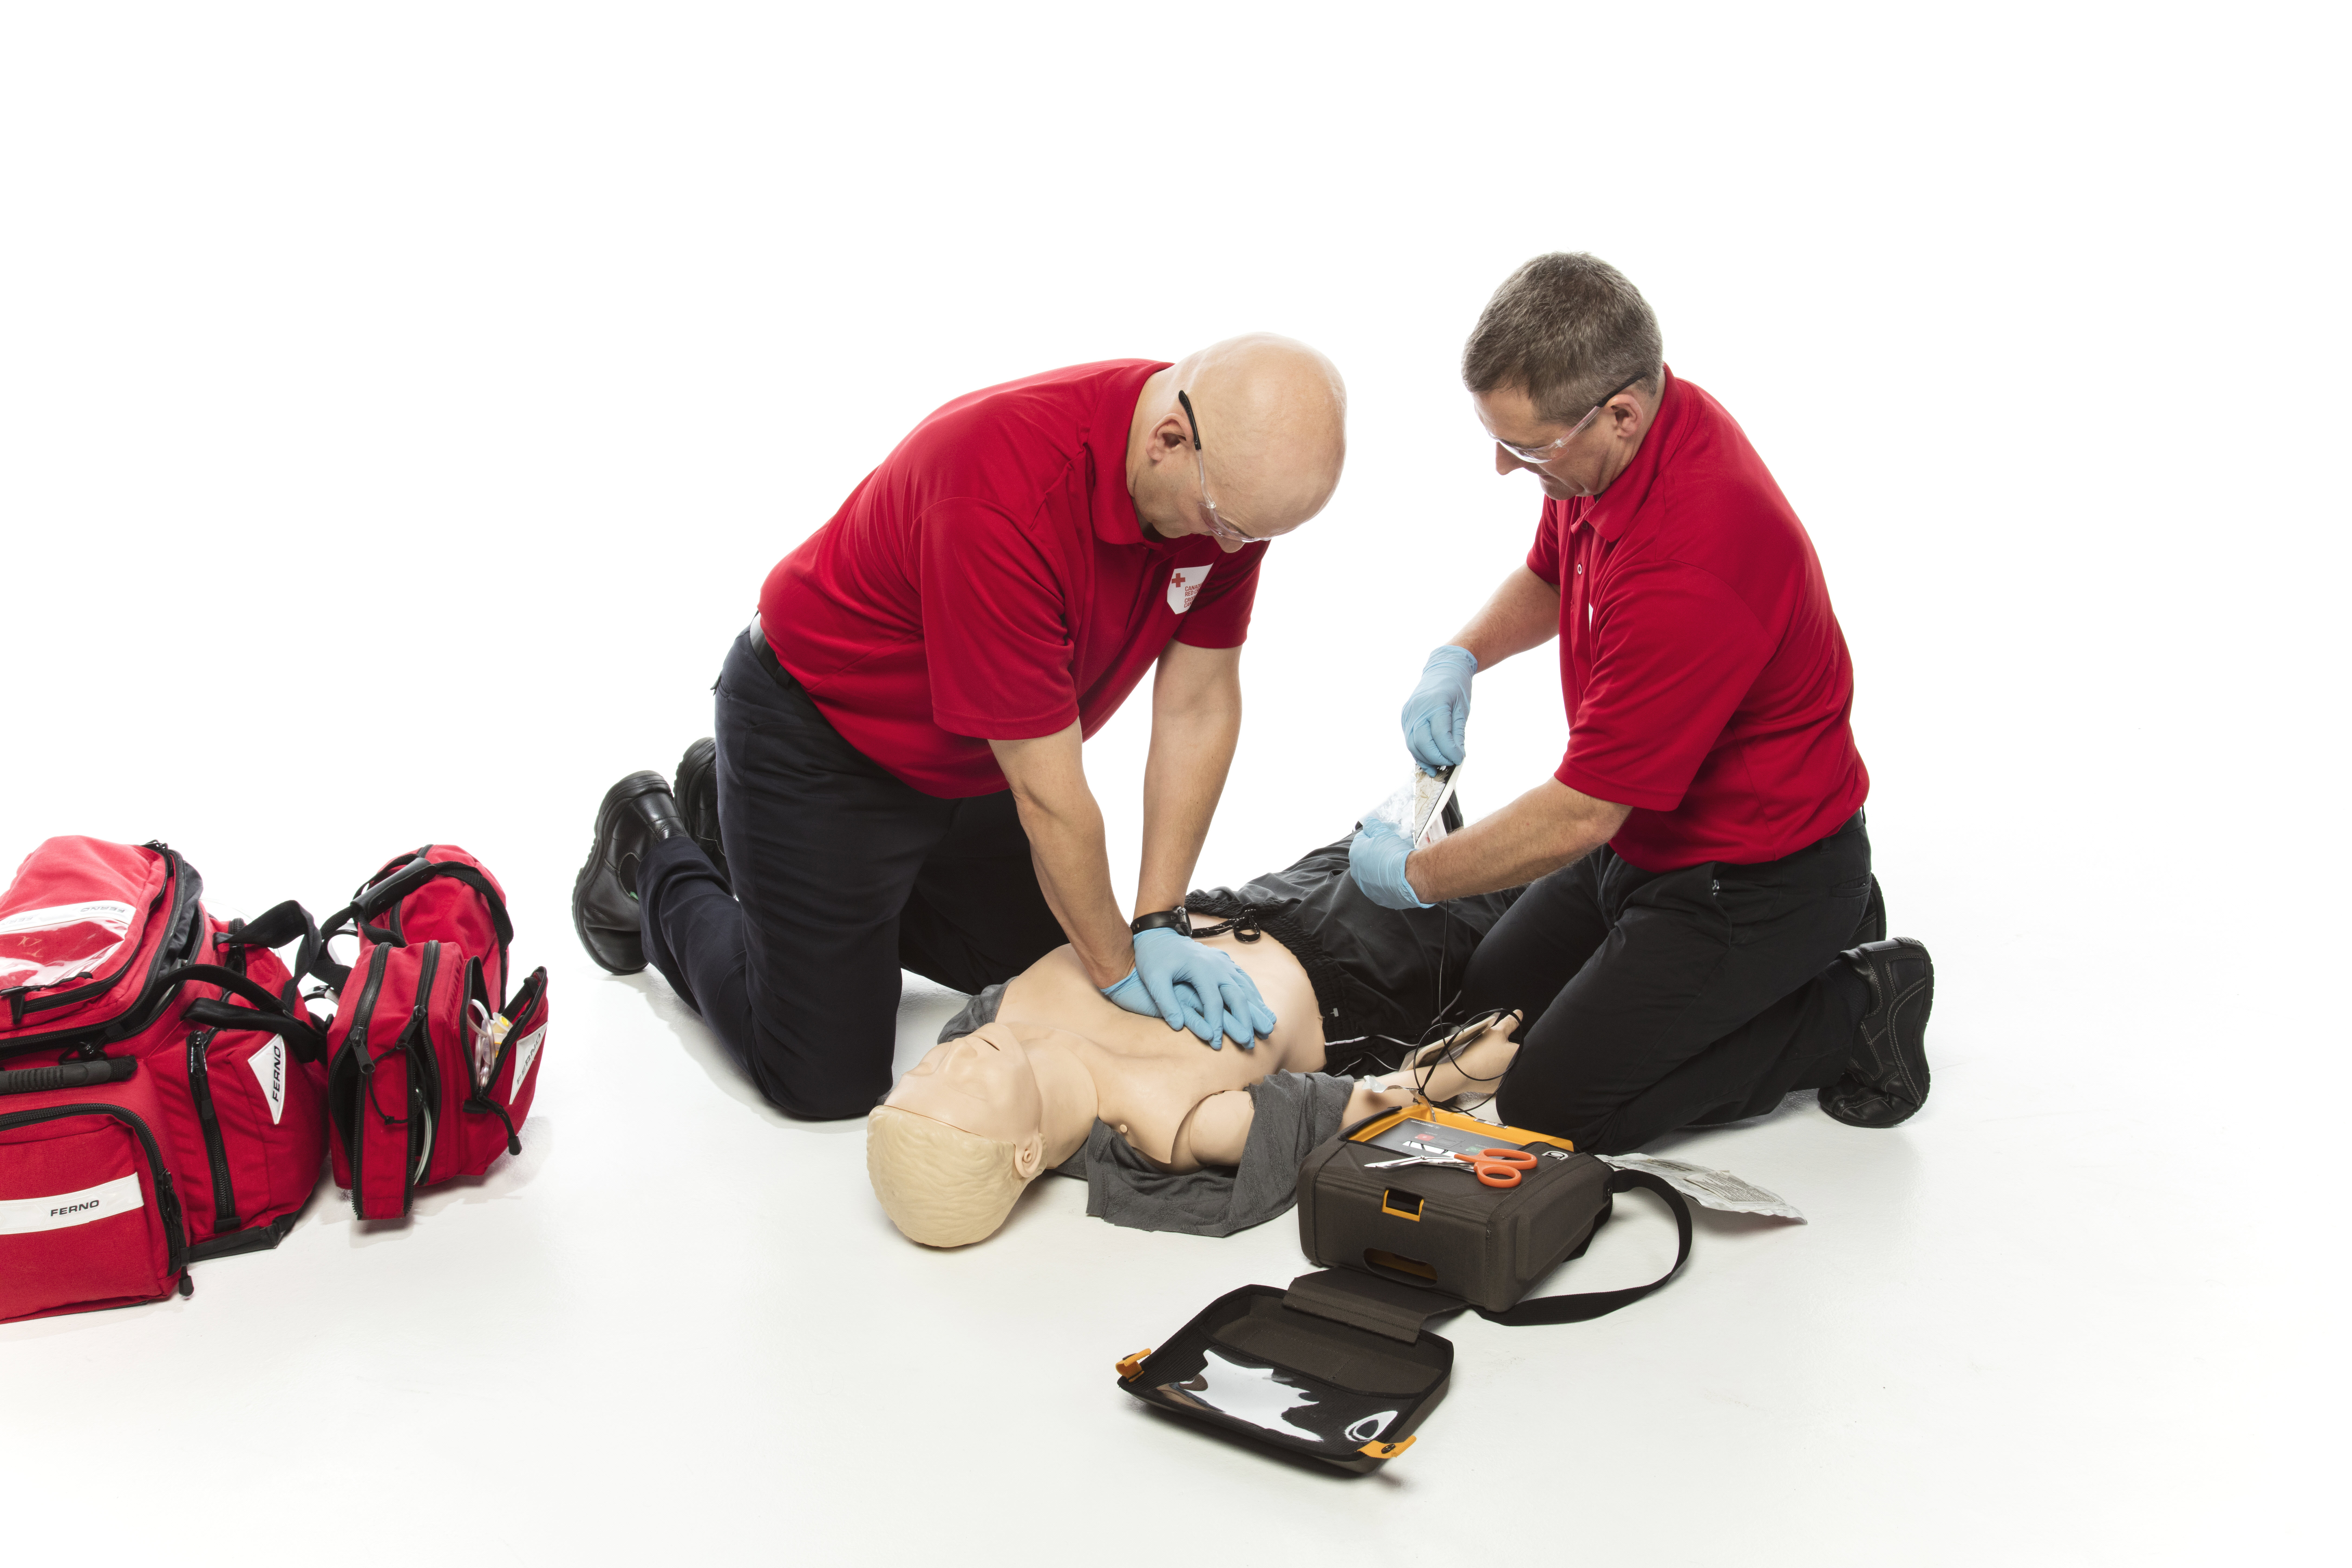 First Aid Course: Basic Life Support Nanaimo